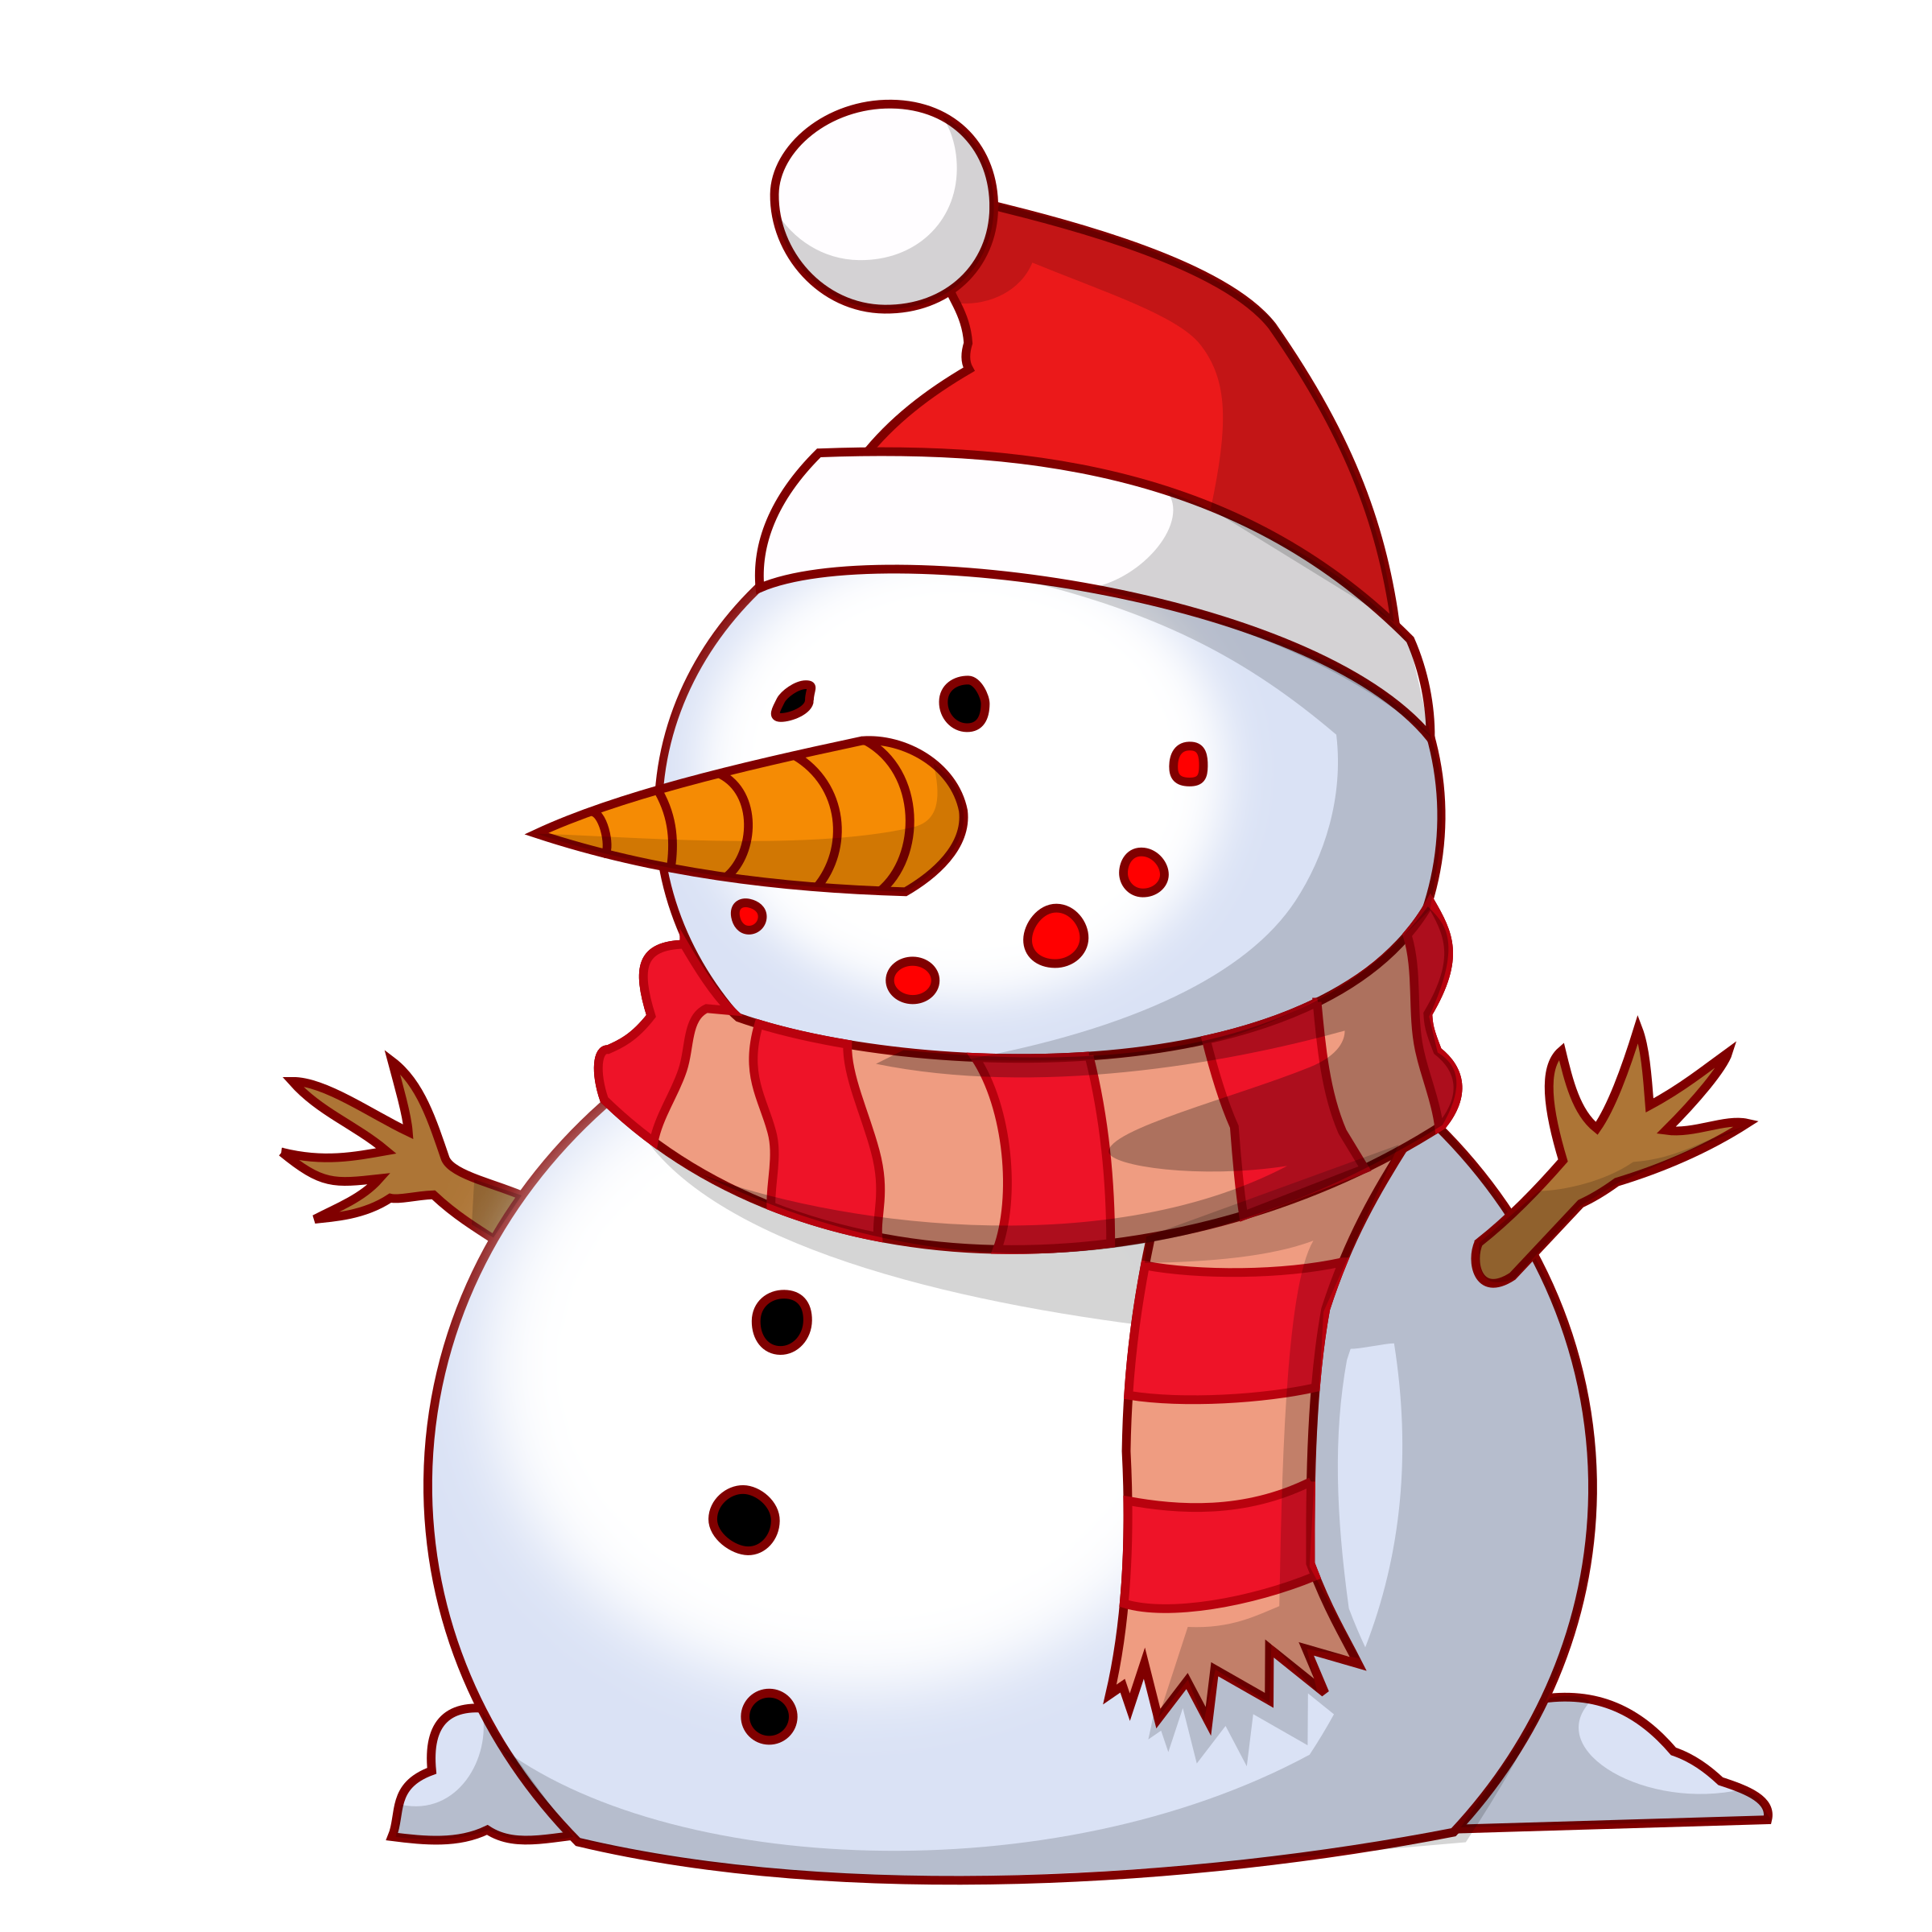 Download Happy Snowman Vector Clipart image - Free stock photo ...